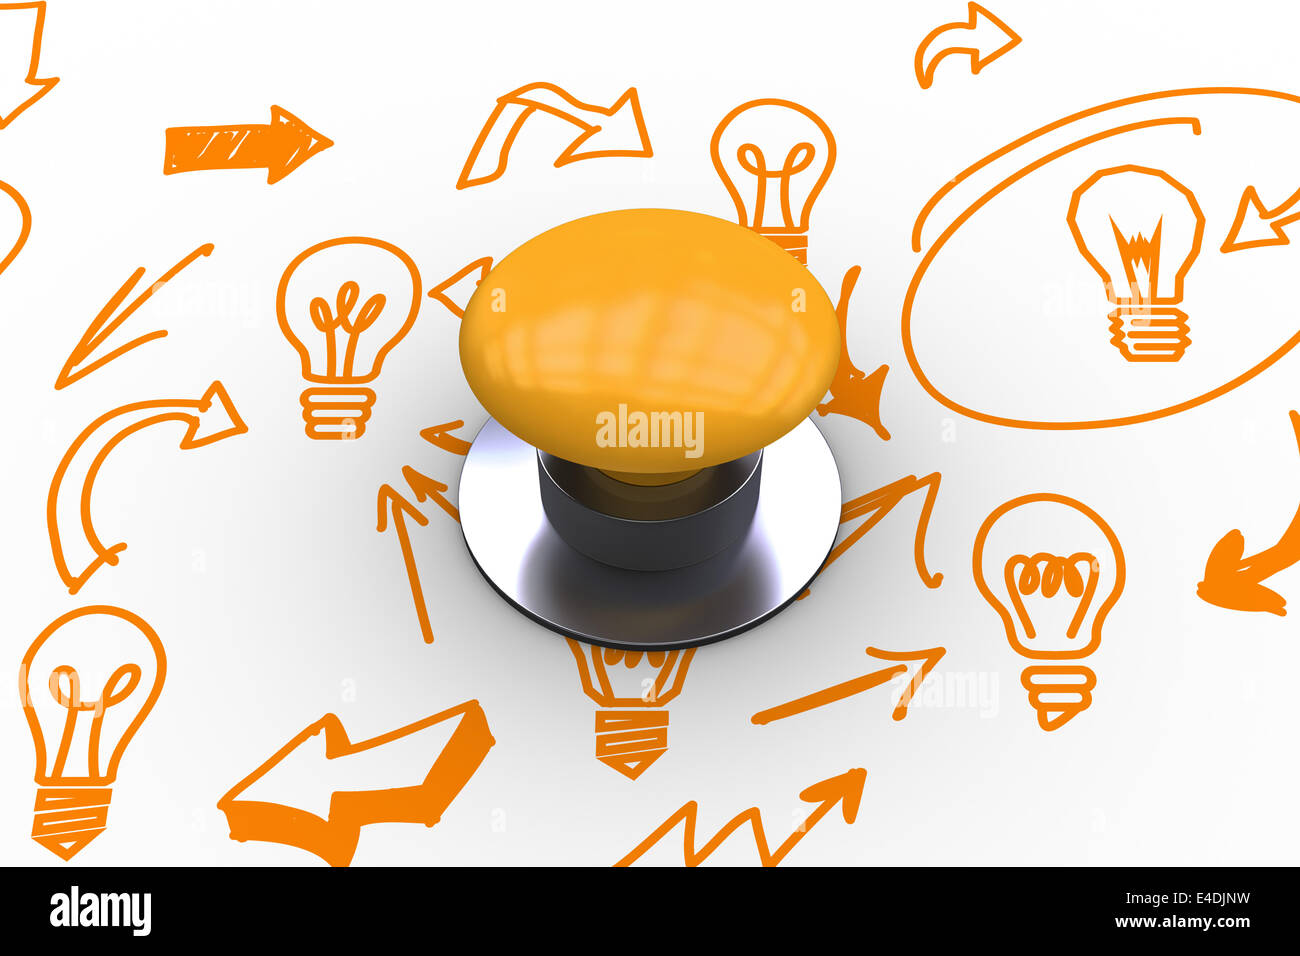 Start against idea and innovation graphic Stock Photo